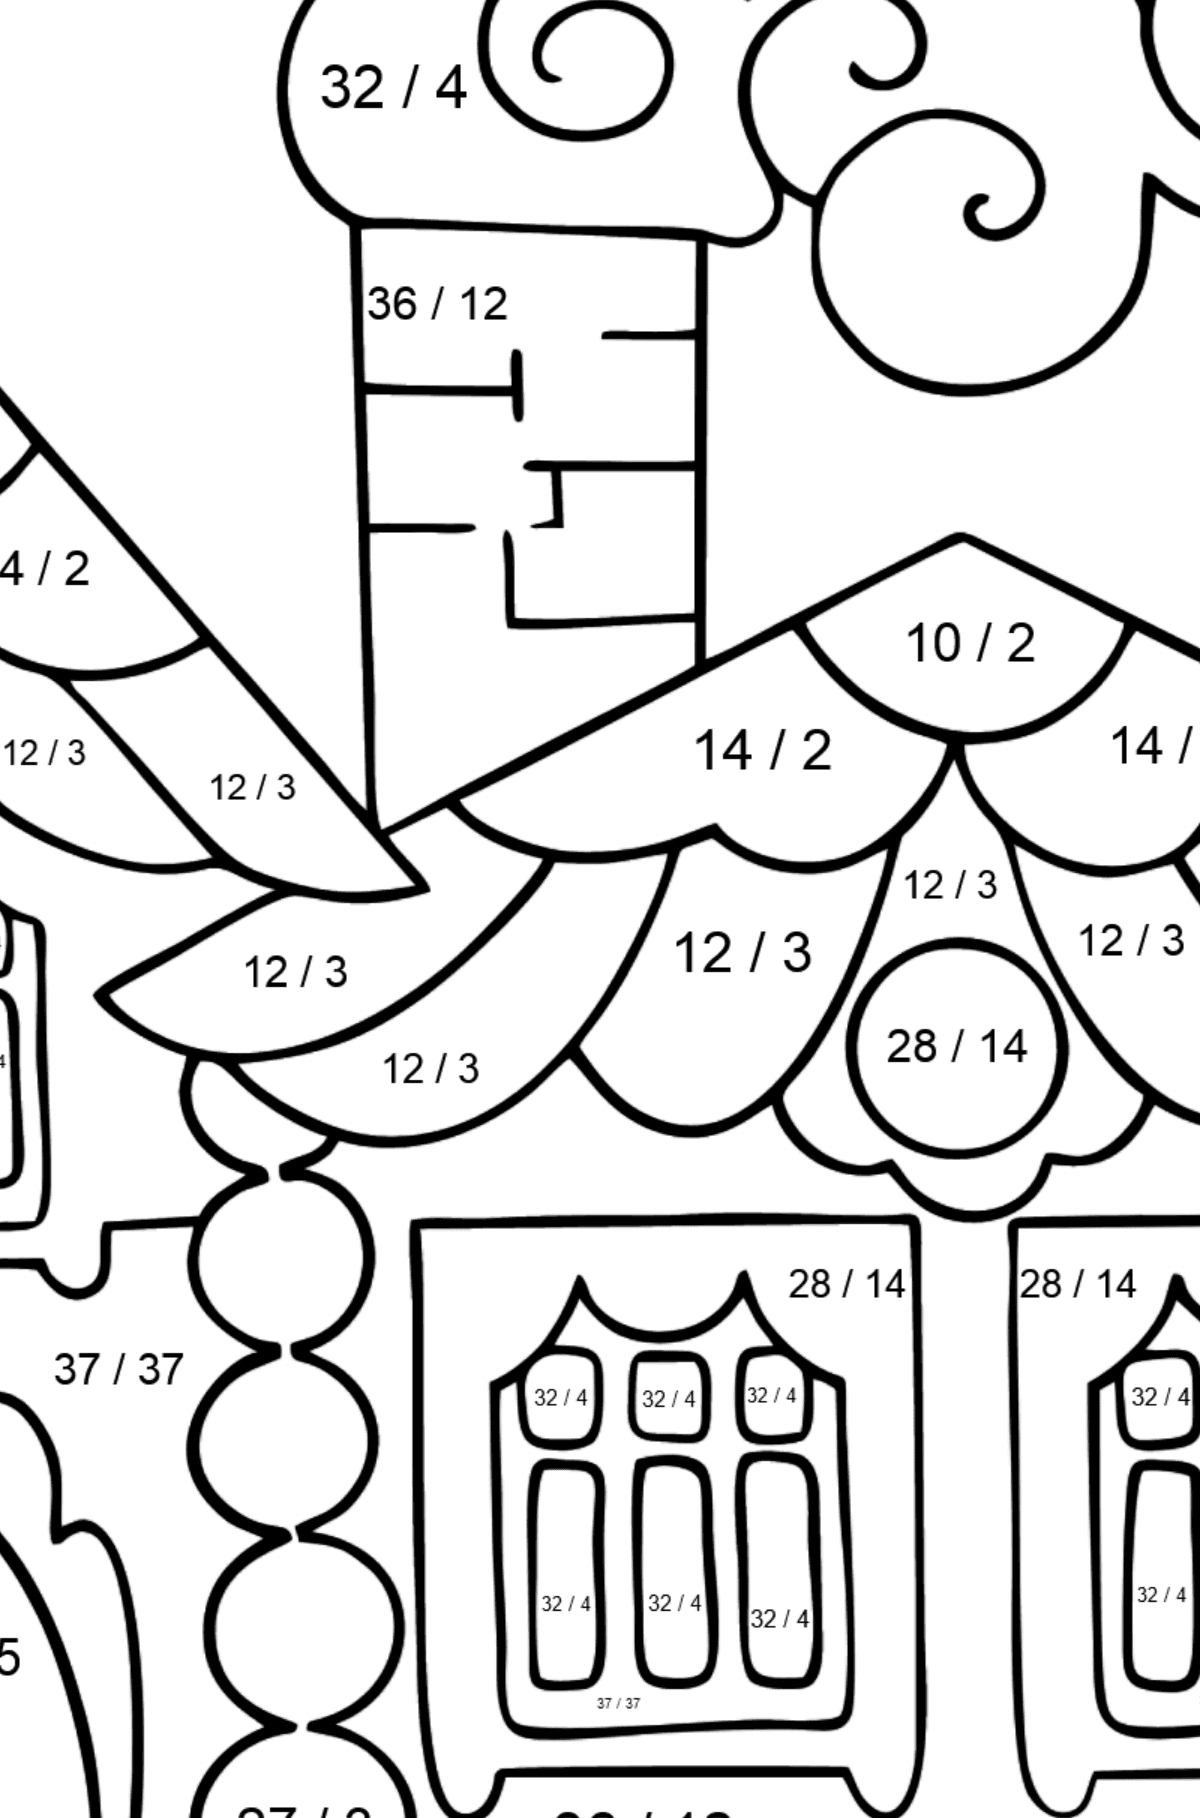 House in the Forest Coloring Page (difficult) - Math Coloring - Division for Kids